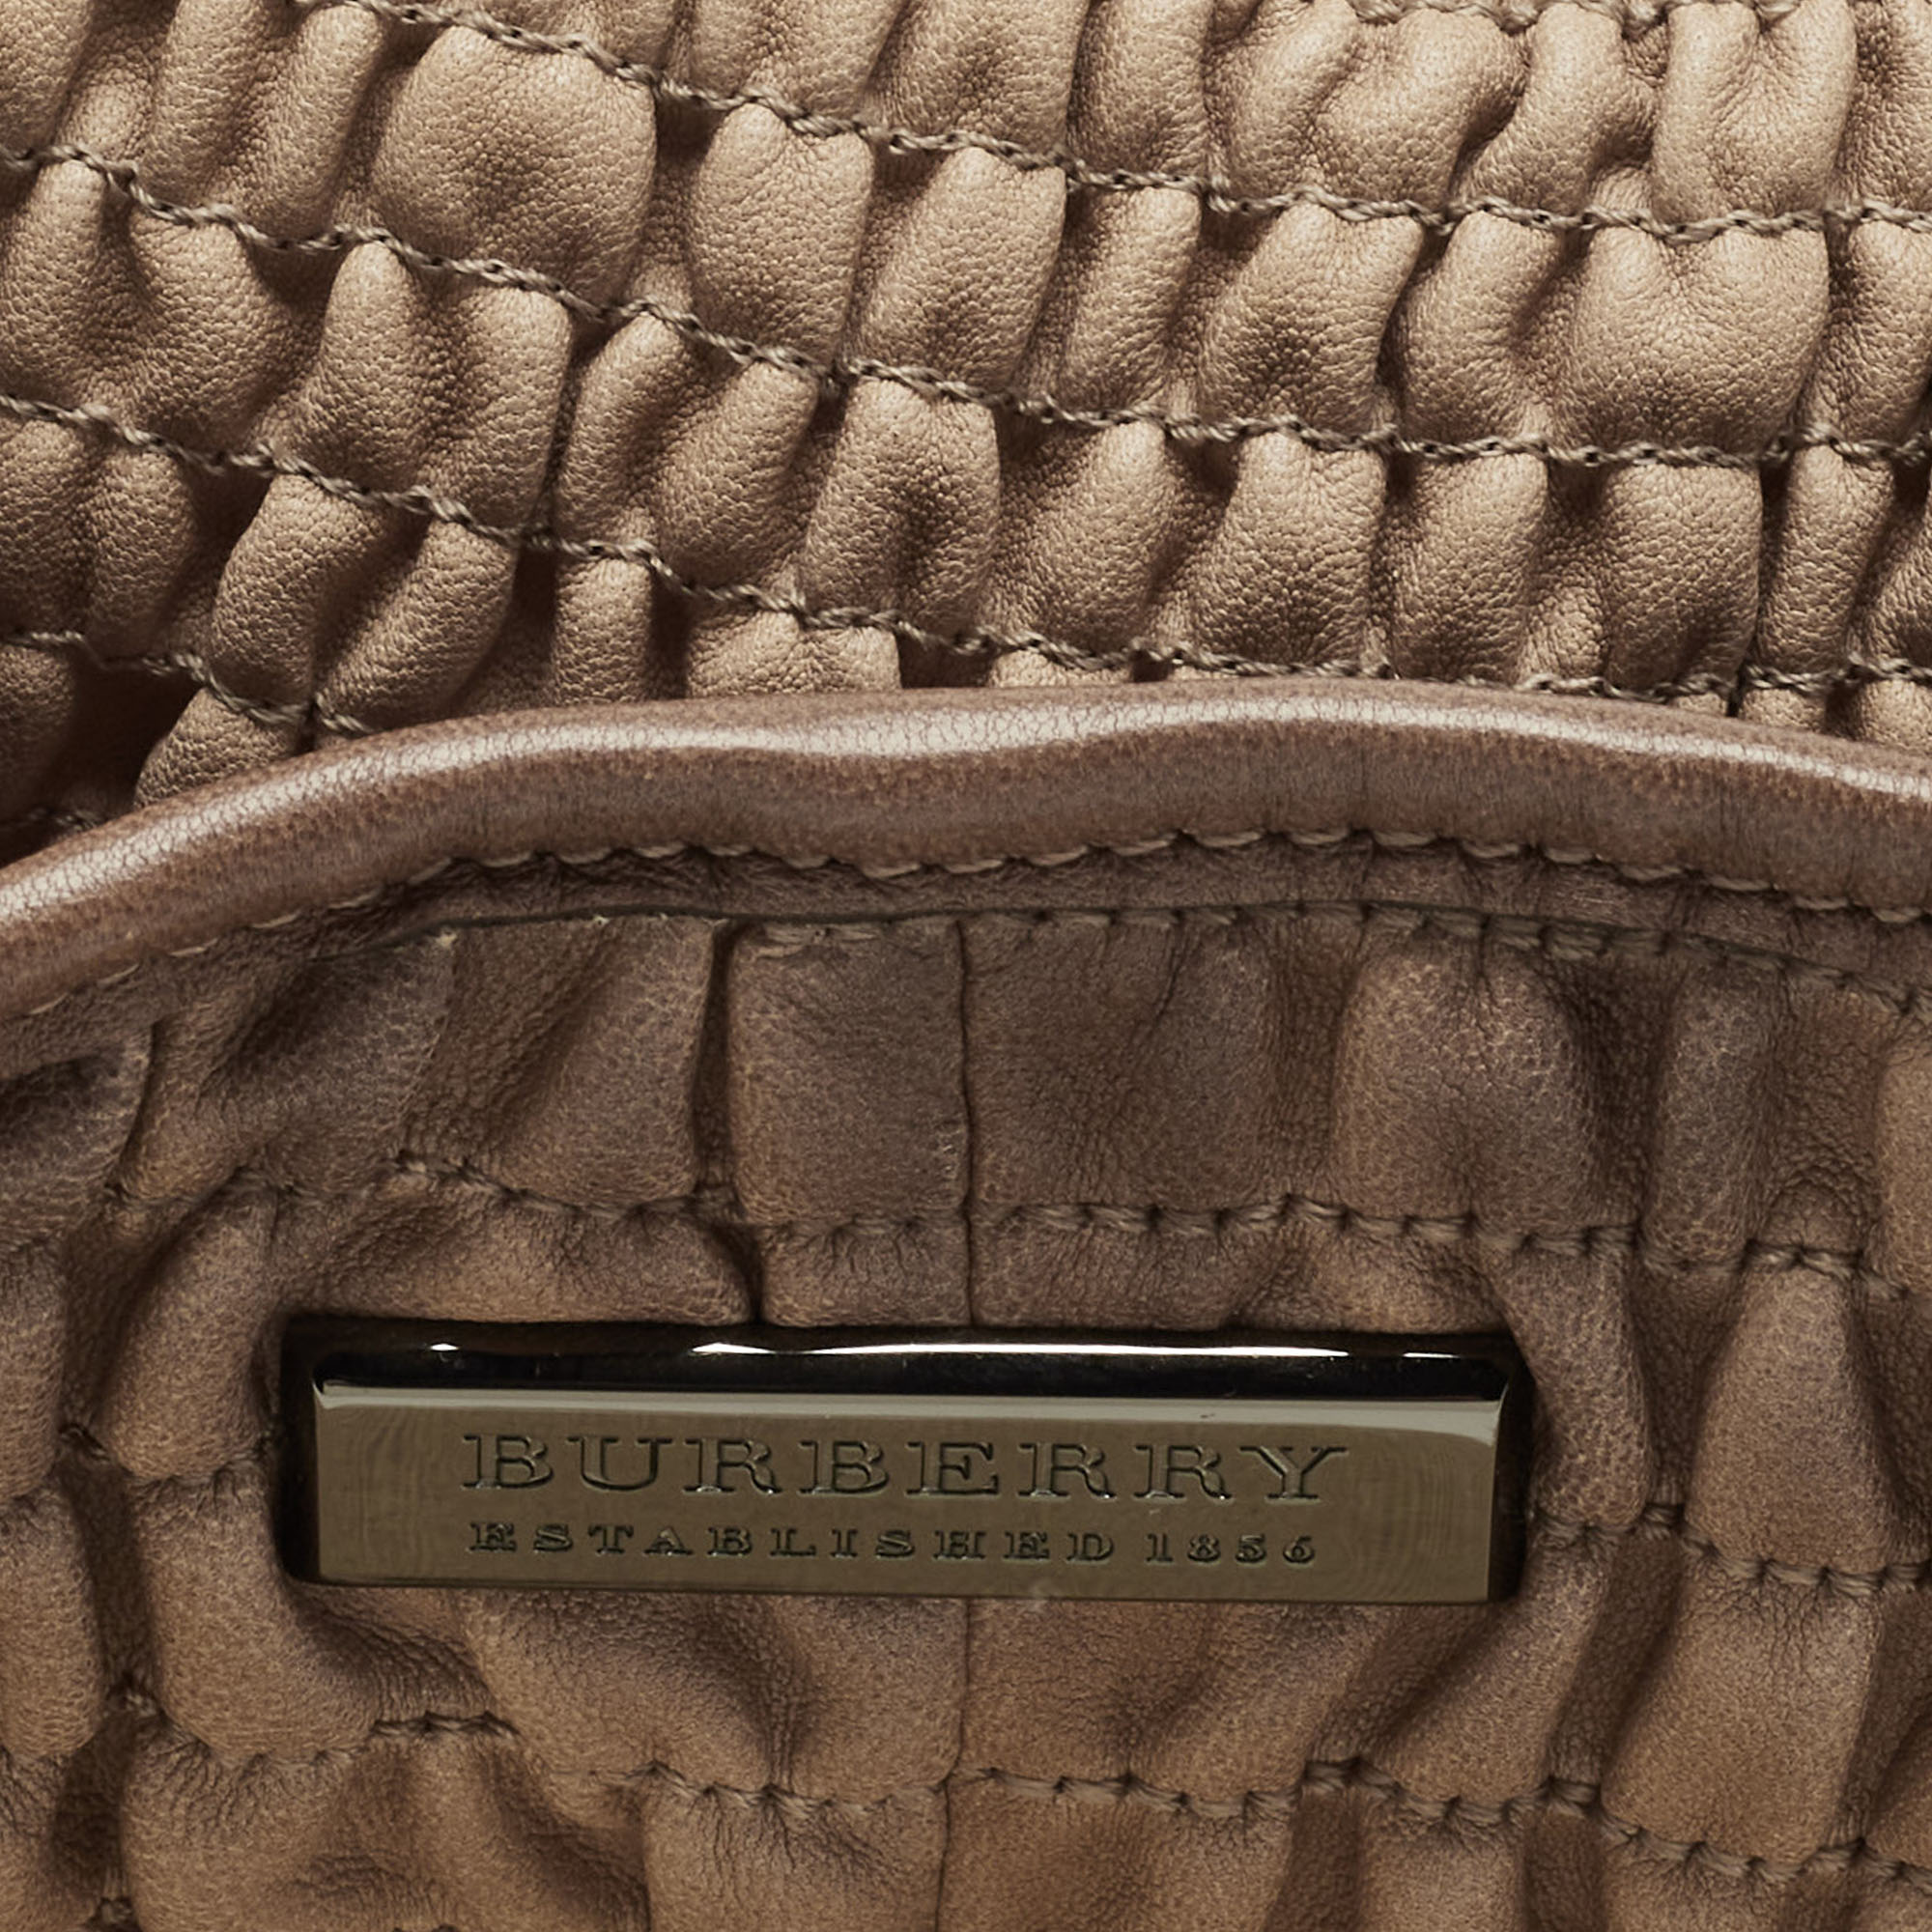 Burberry Brown Pleated Leather Shoulder Bag